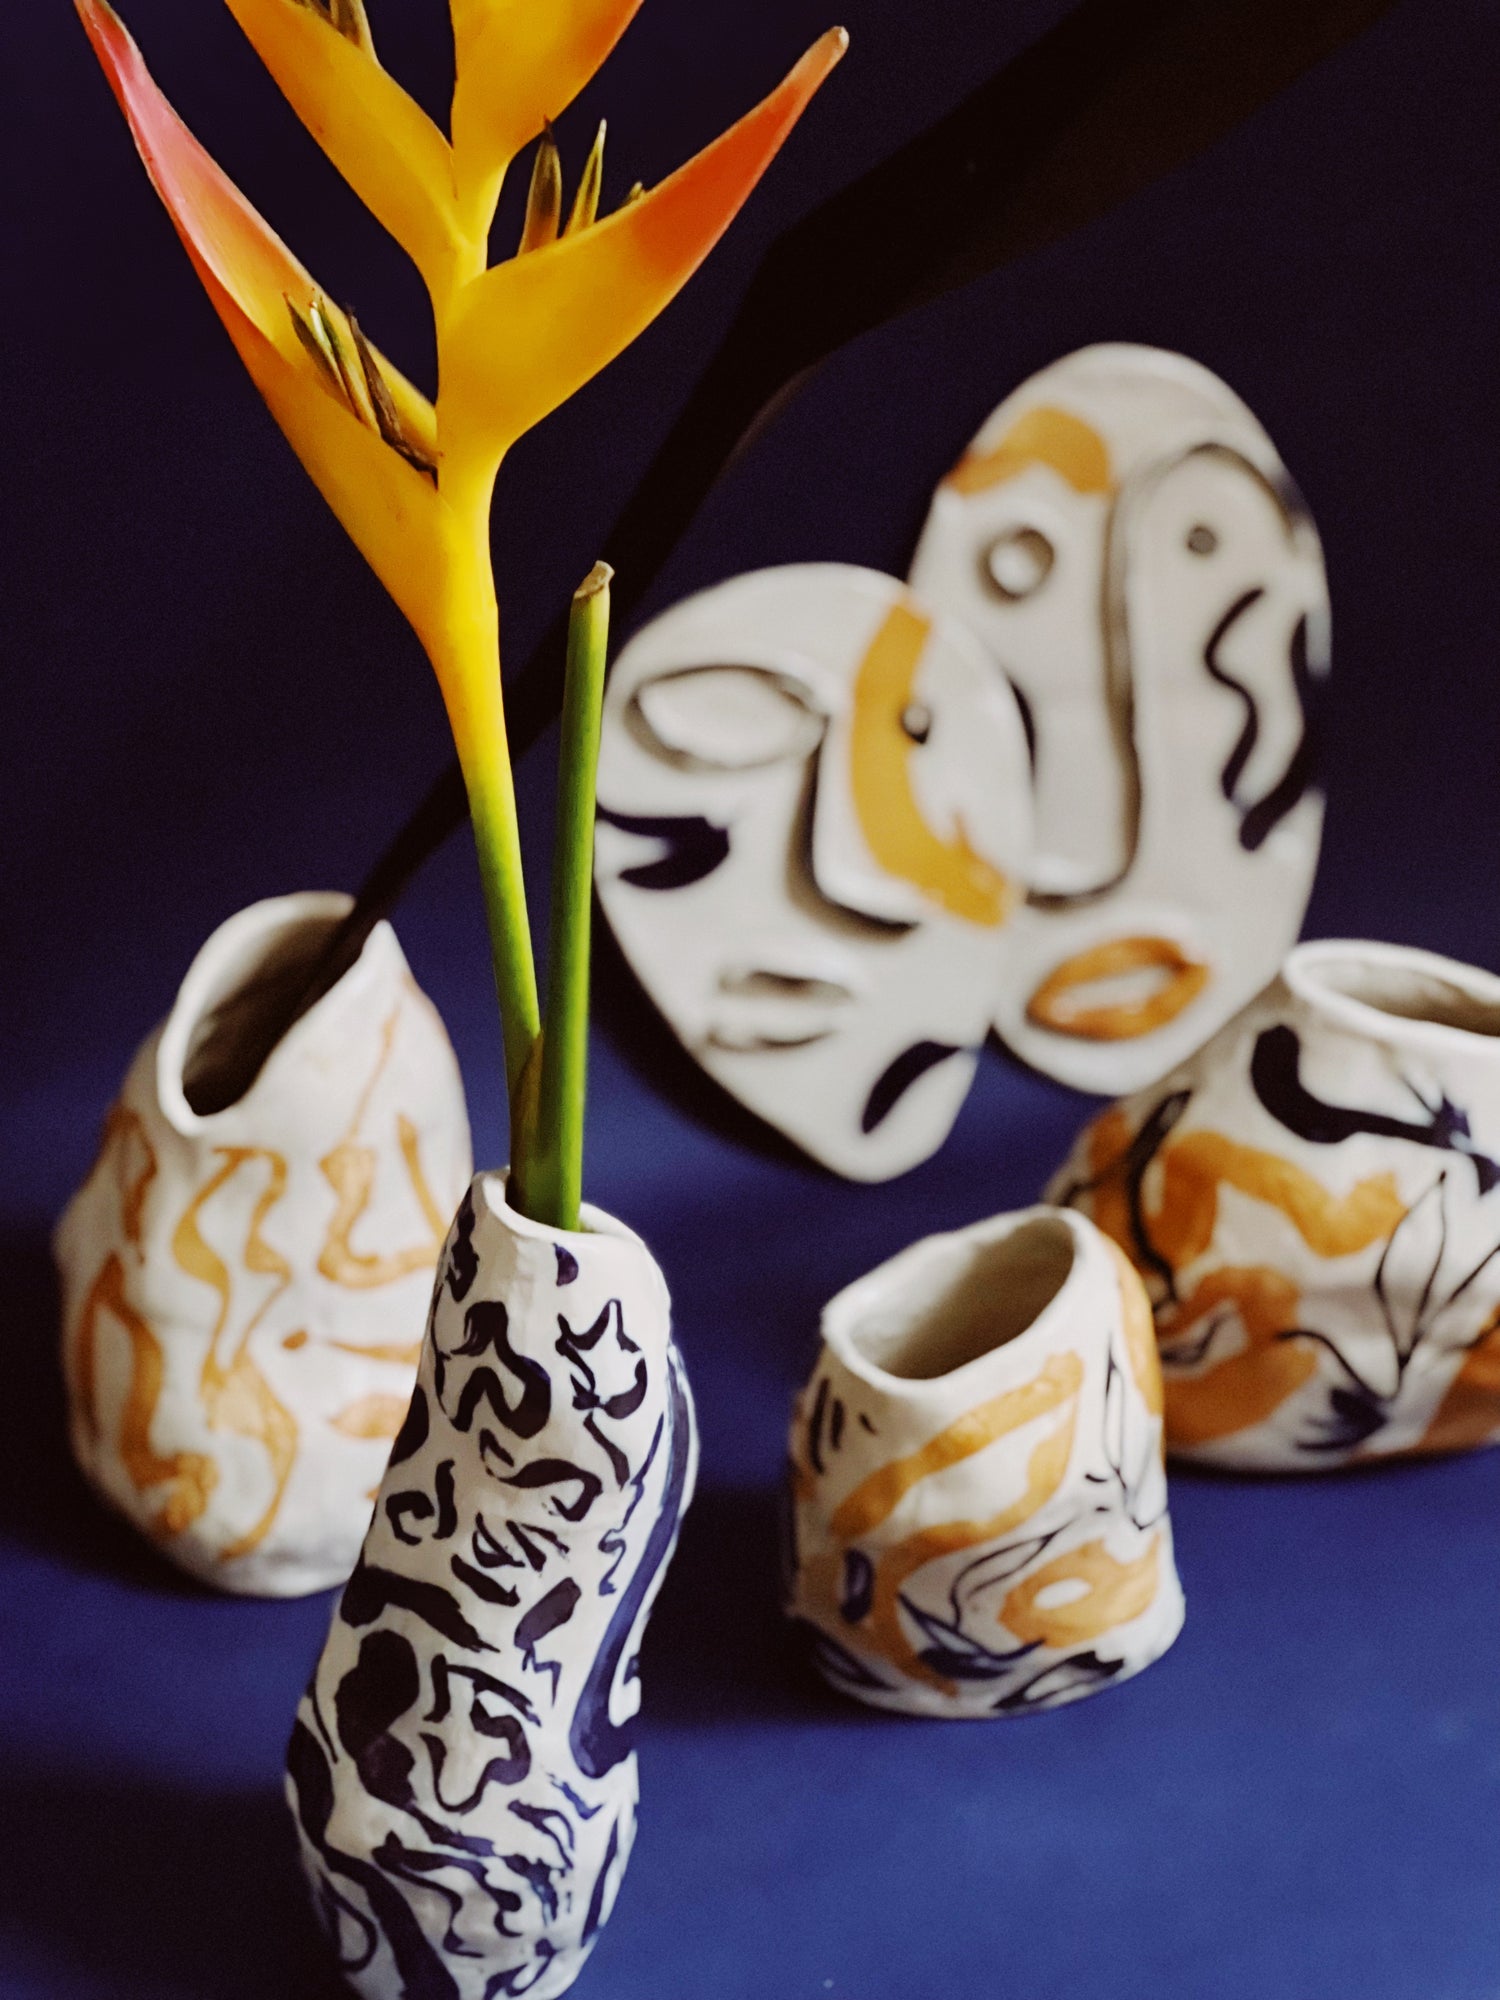 Faces and vases